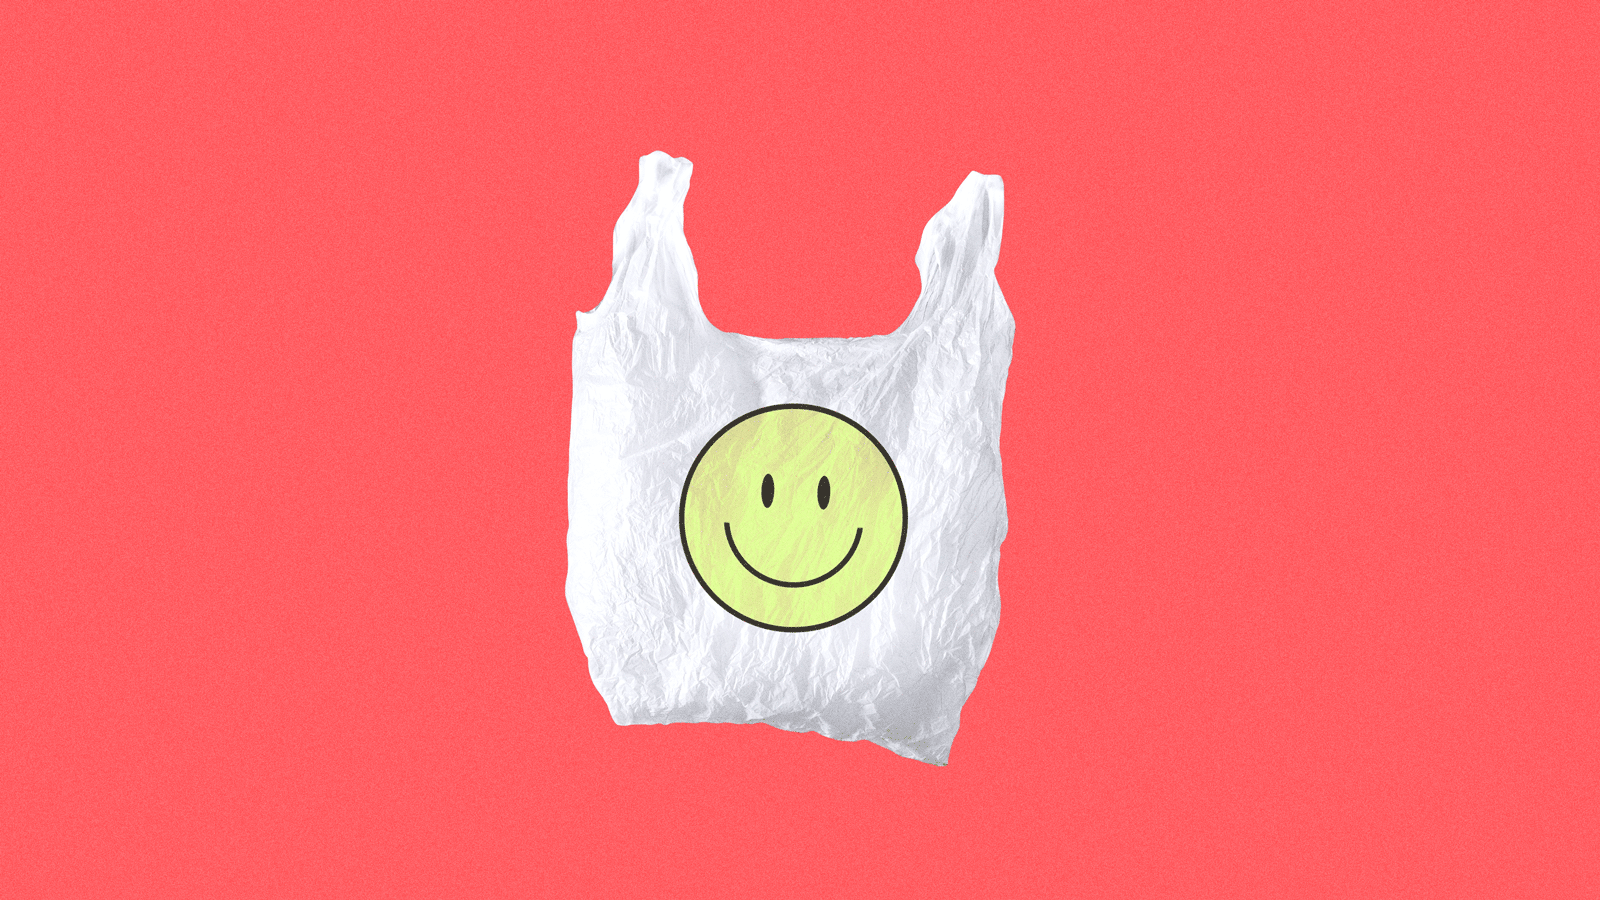 Animation: Plastic bag eaten by an invisible organism